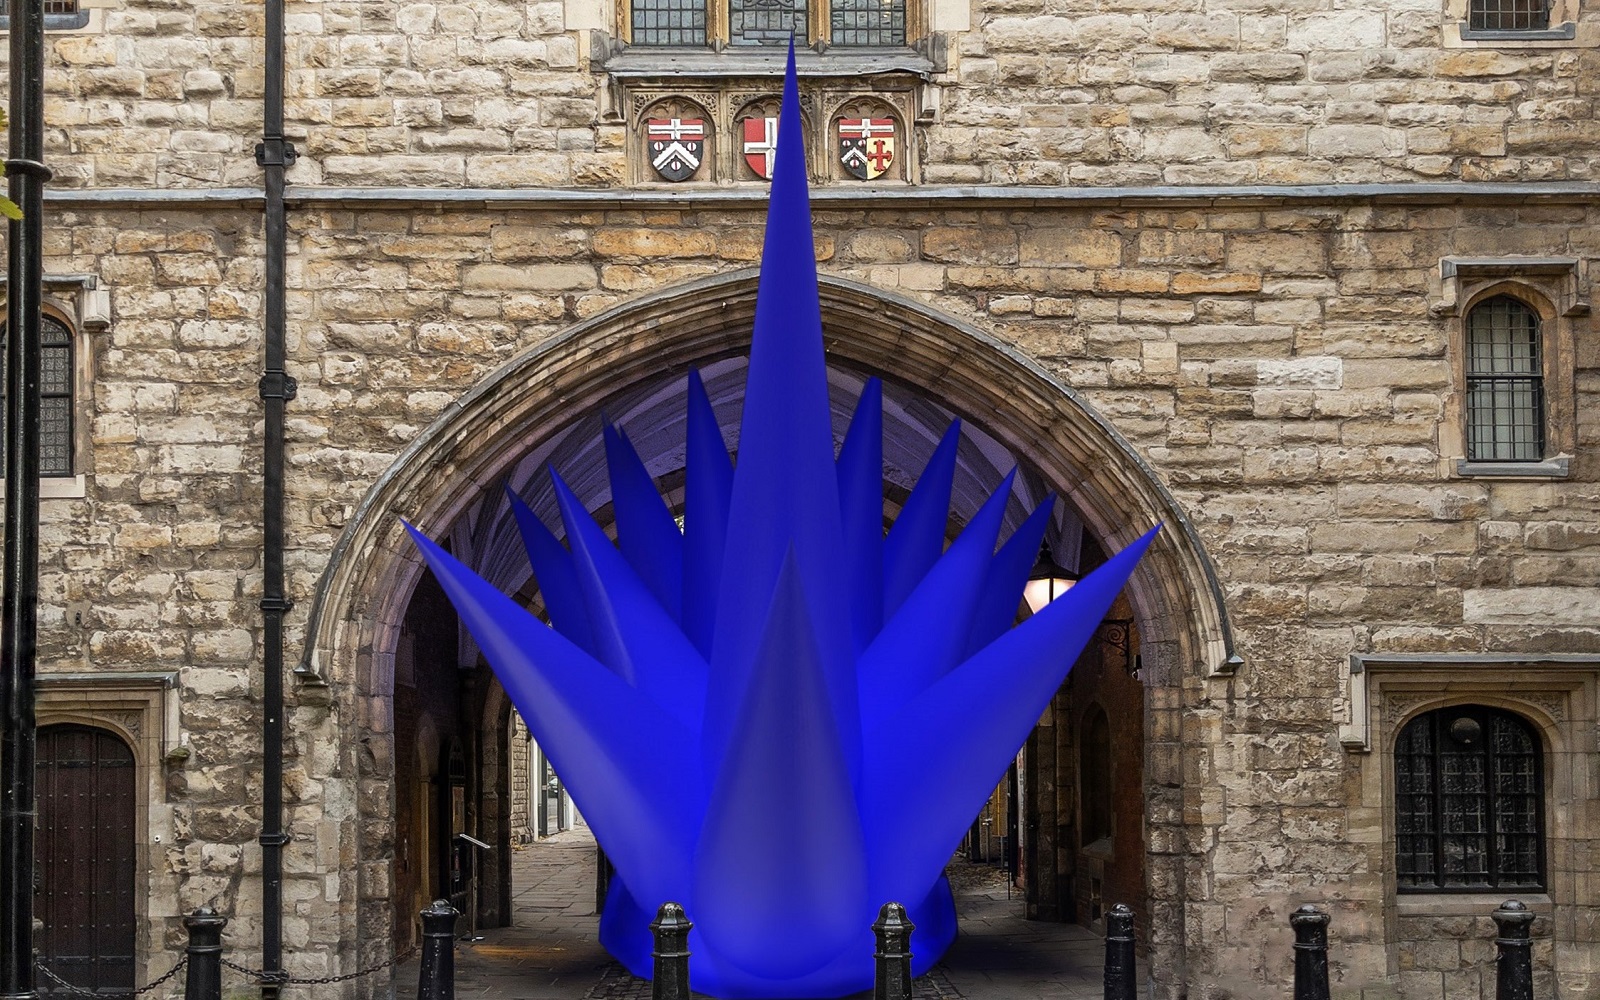 spiked blue inflatable art installation by Steve Messam for CDW 2023